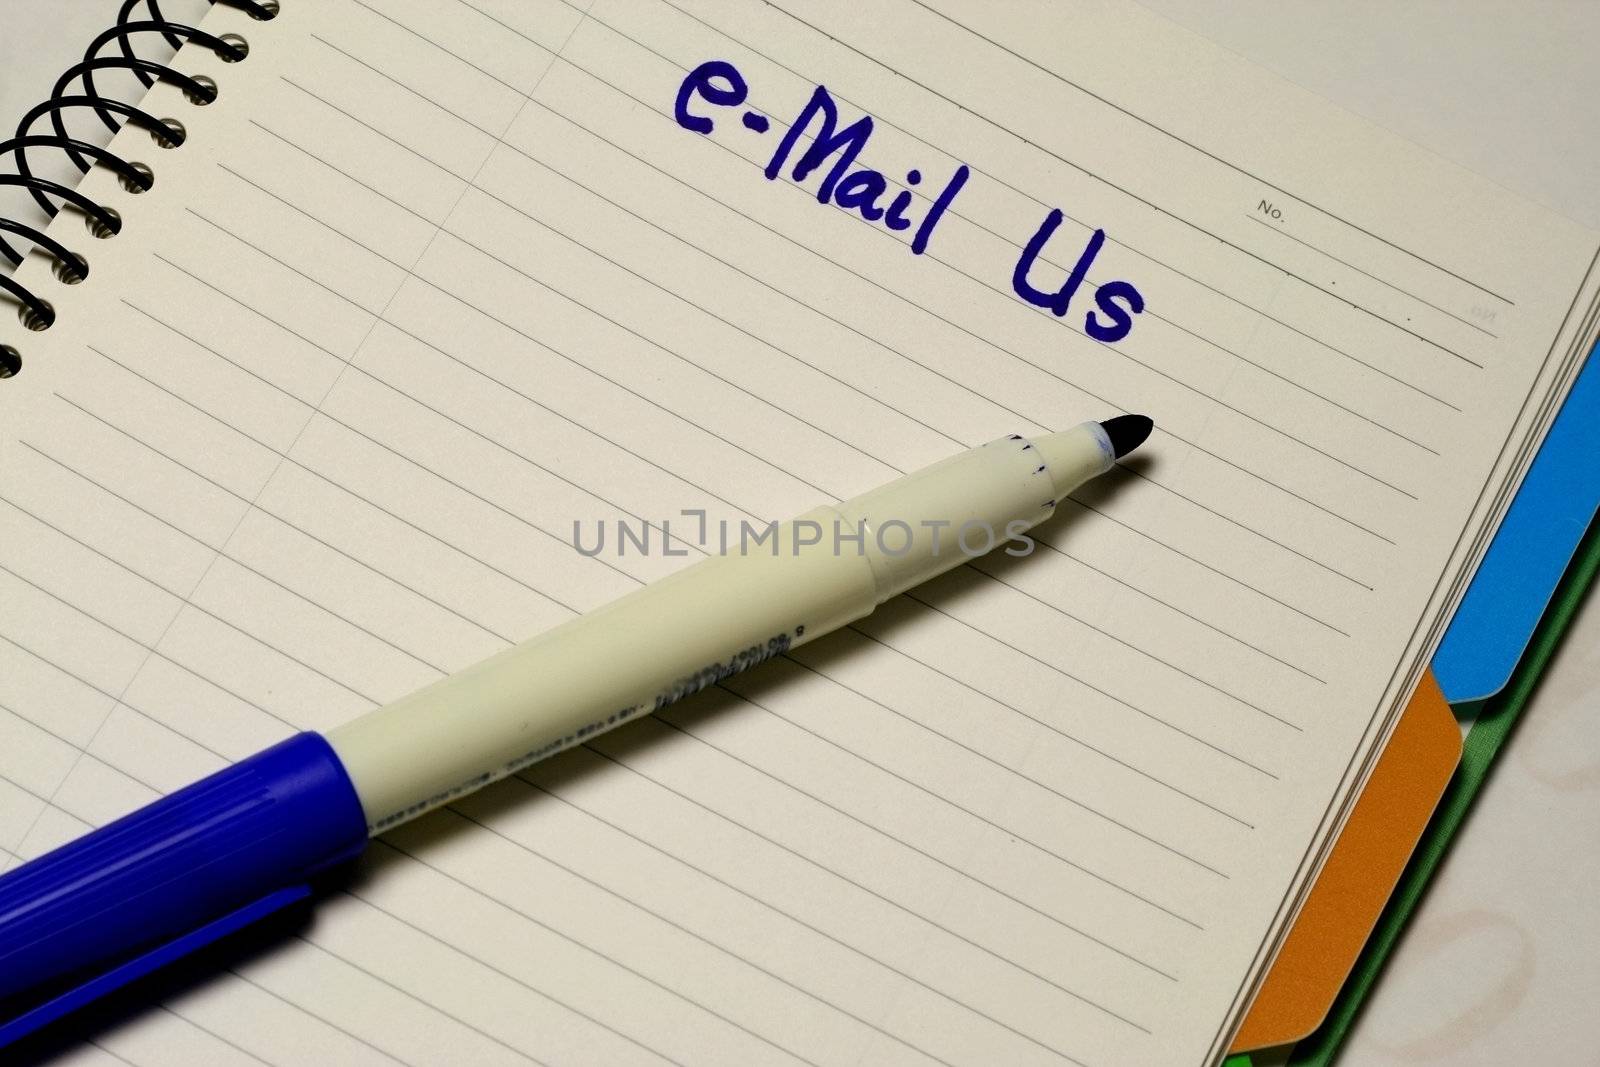 Pentel pen writes over spiral notebook writing email us
